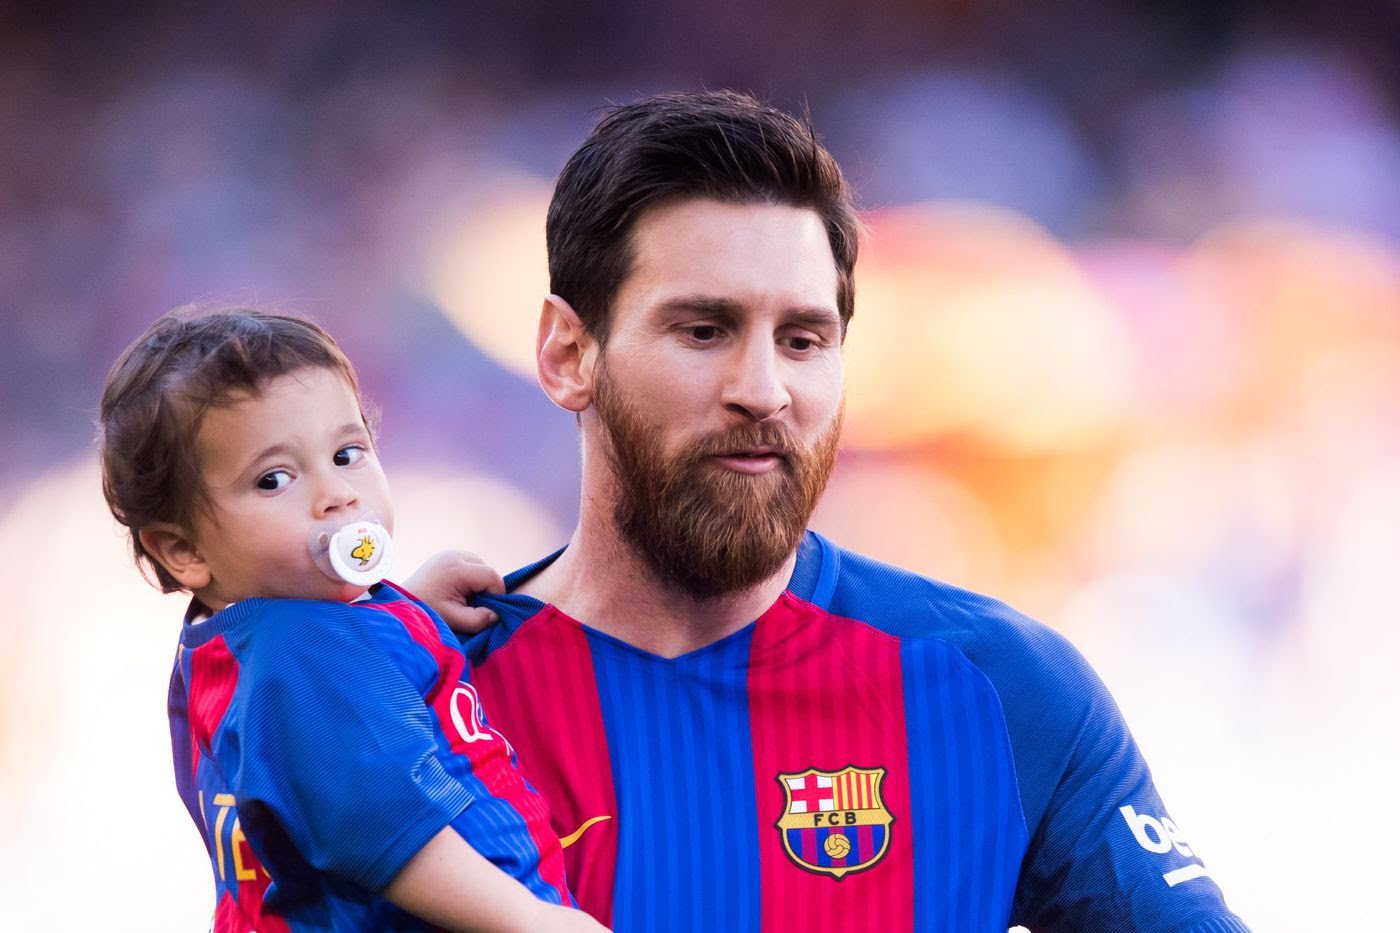 Messi Says His Son Trolls Him By Saying “I’m Liverpool, Who Beat You" (Video)